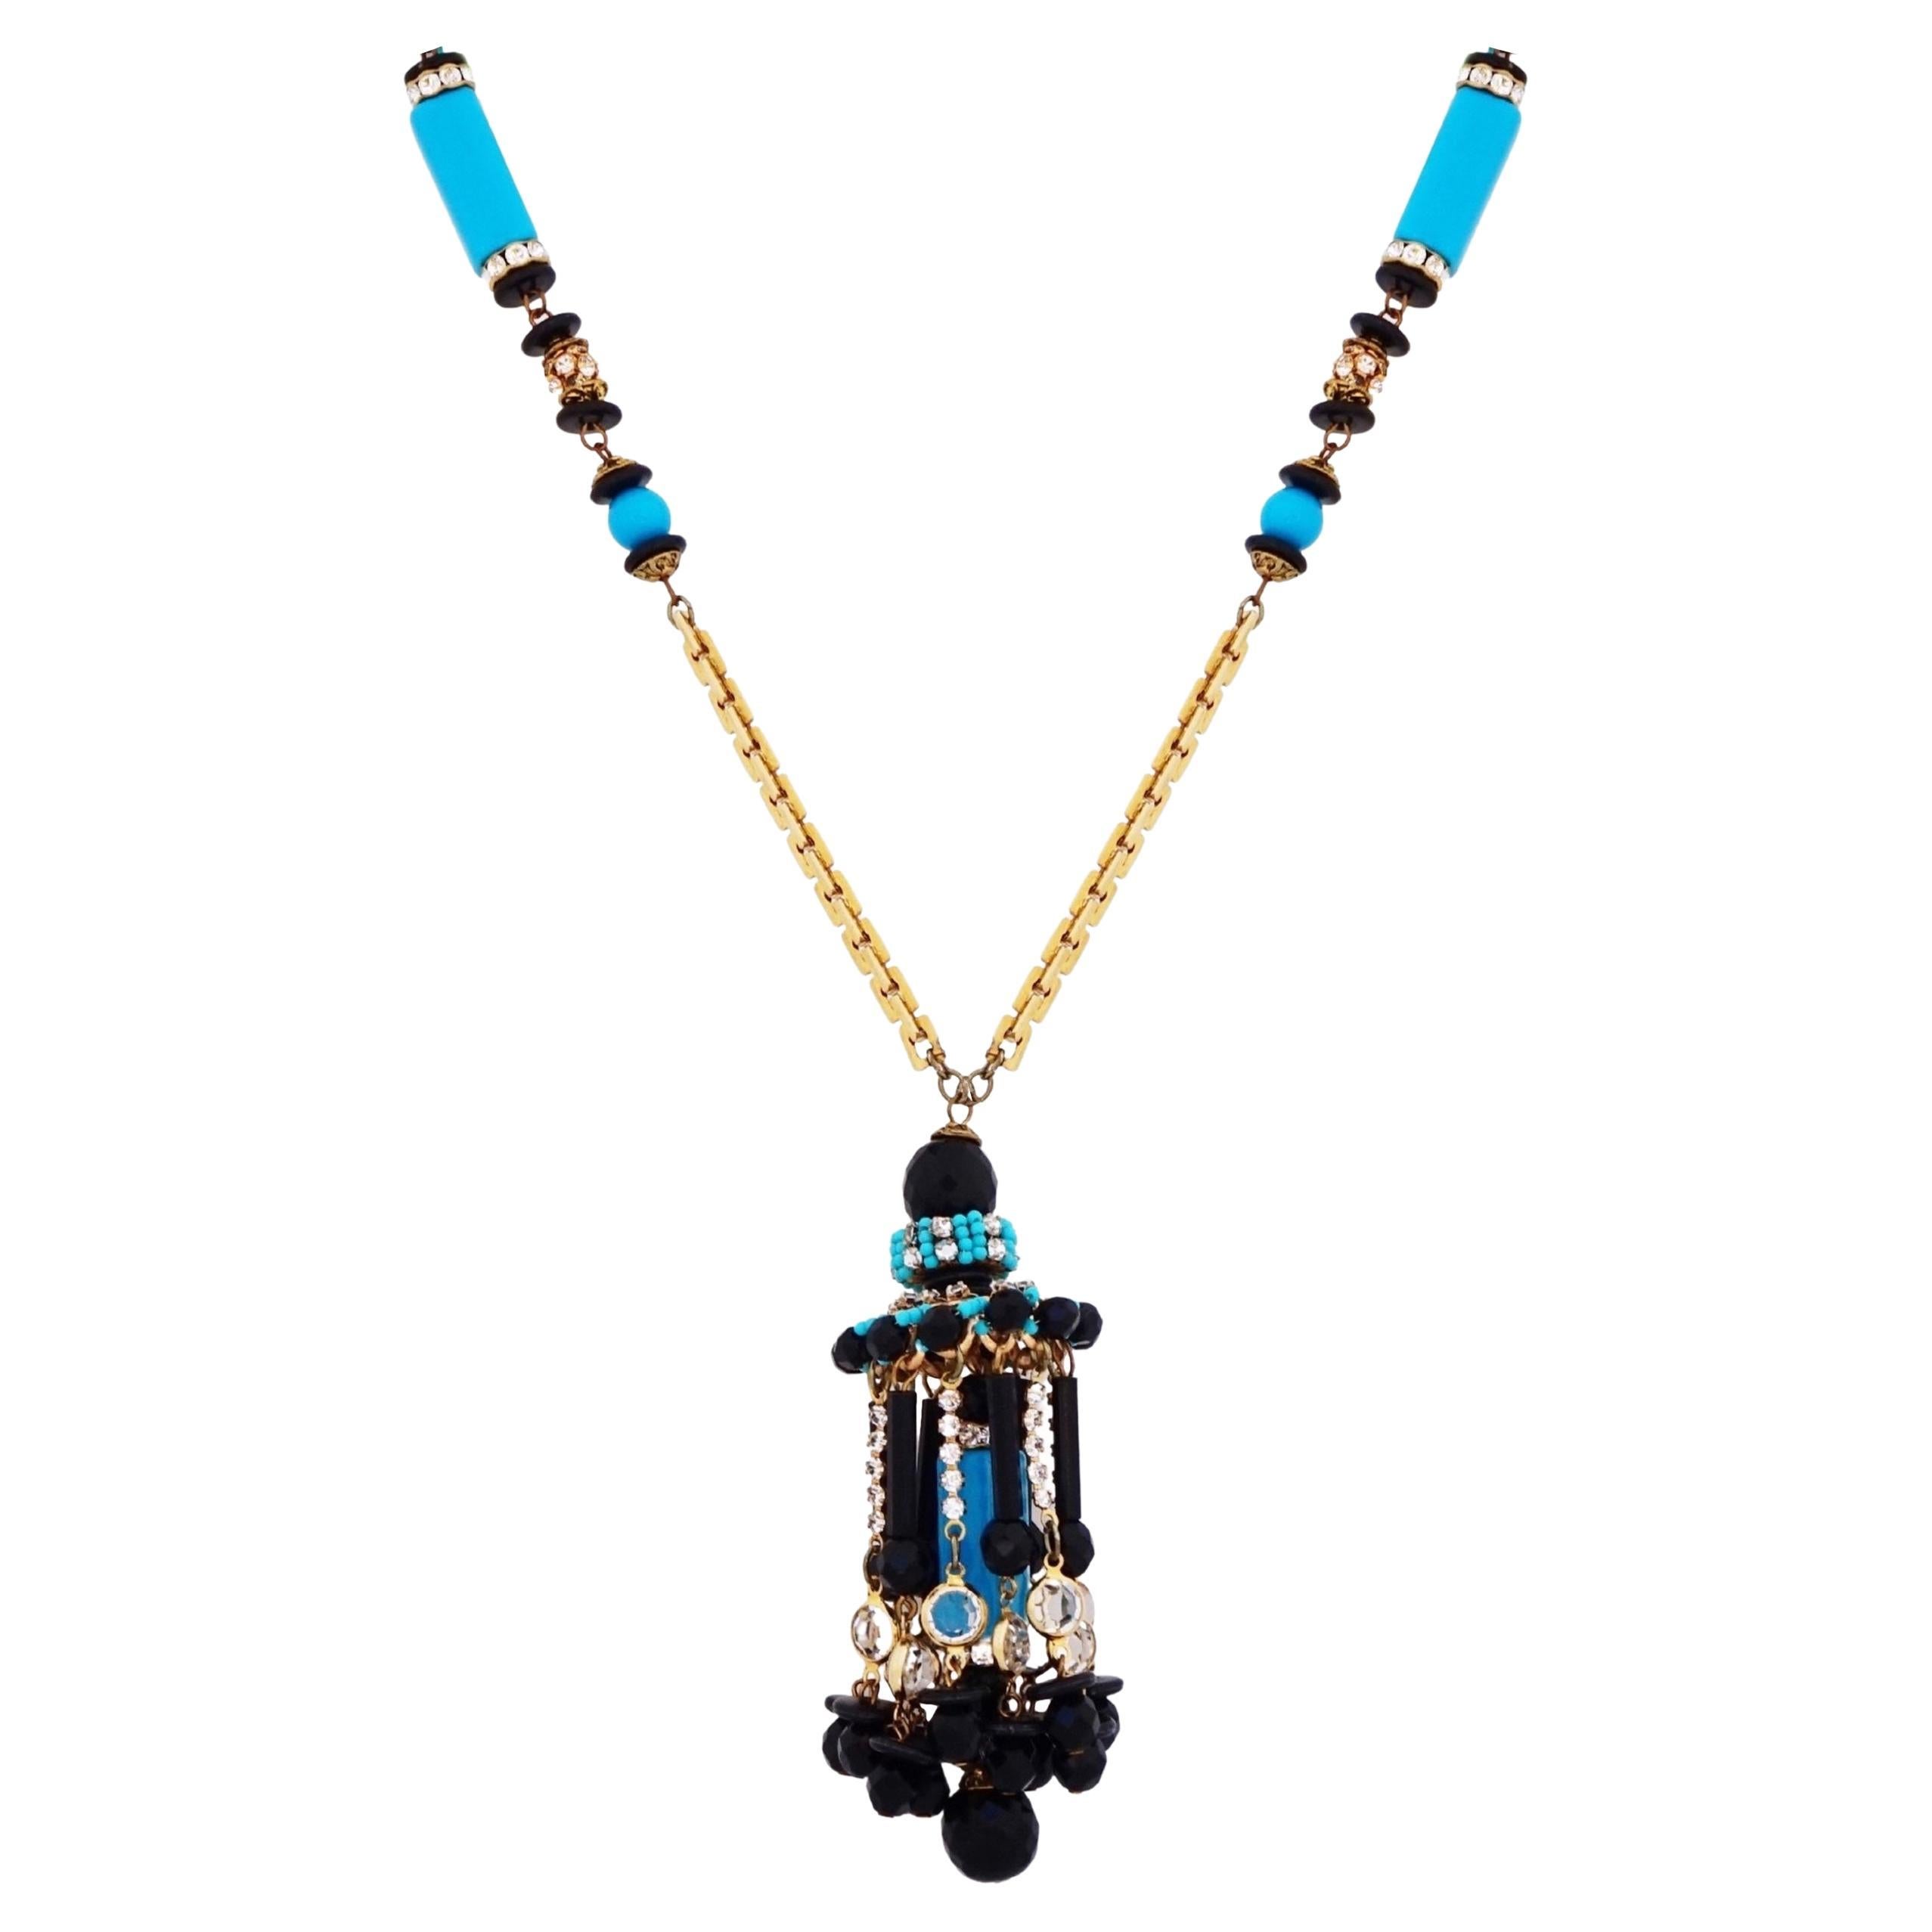 Turquoise and Onyx Beaded Tassel Statement Necklace By Lawrence Vrba, 1970s For Sale